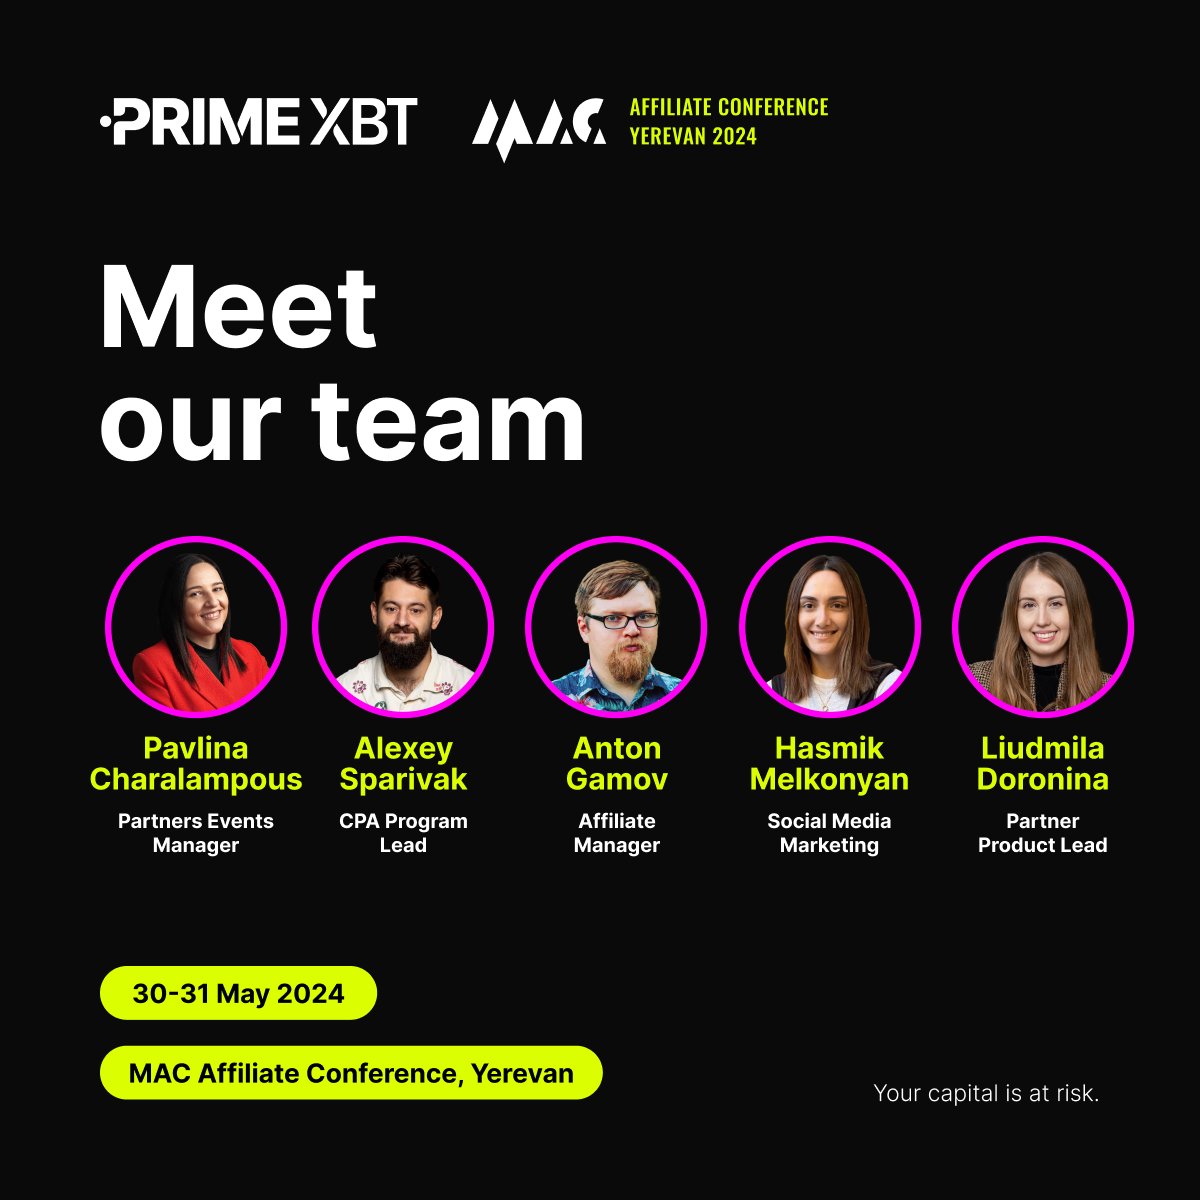 Excitement is building for MAC Yerevan.

🇦🇲 Catch the #PrimeXBT team in Armenia on 30-31 May. Come by, say hello, and learn how to boost your affiliate earnings.

Meet us there! 👋